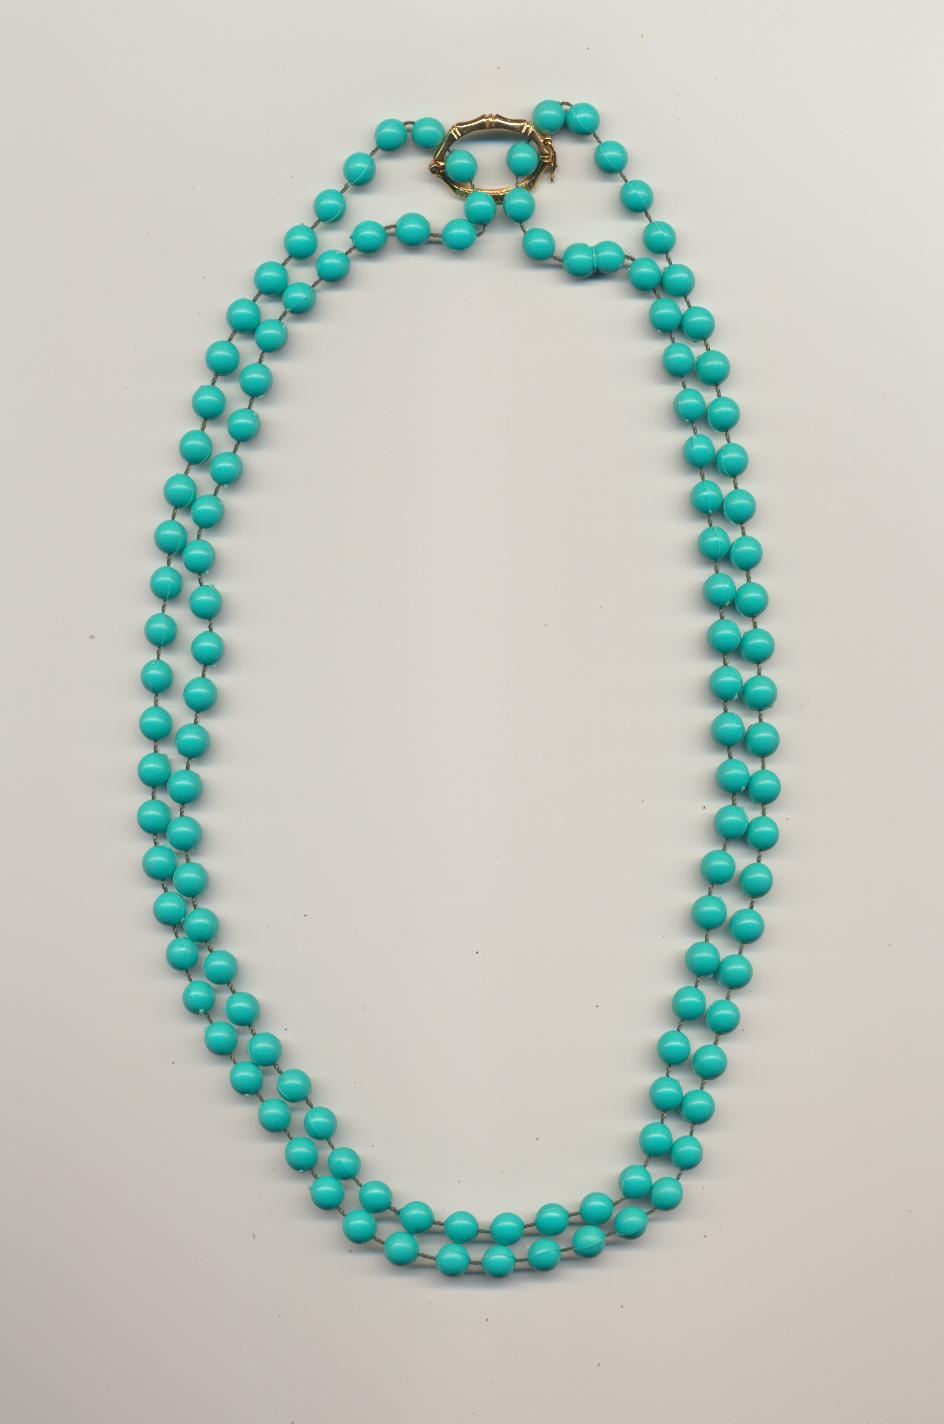 A Double or Four Strand Bead Necklace Made Of One Necklace And A Pearl Shortener